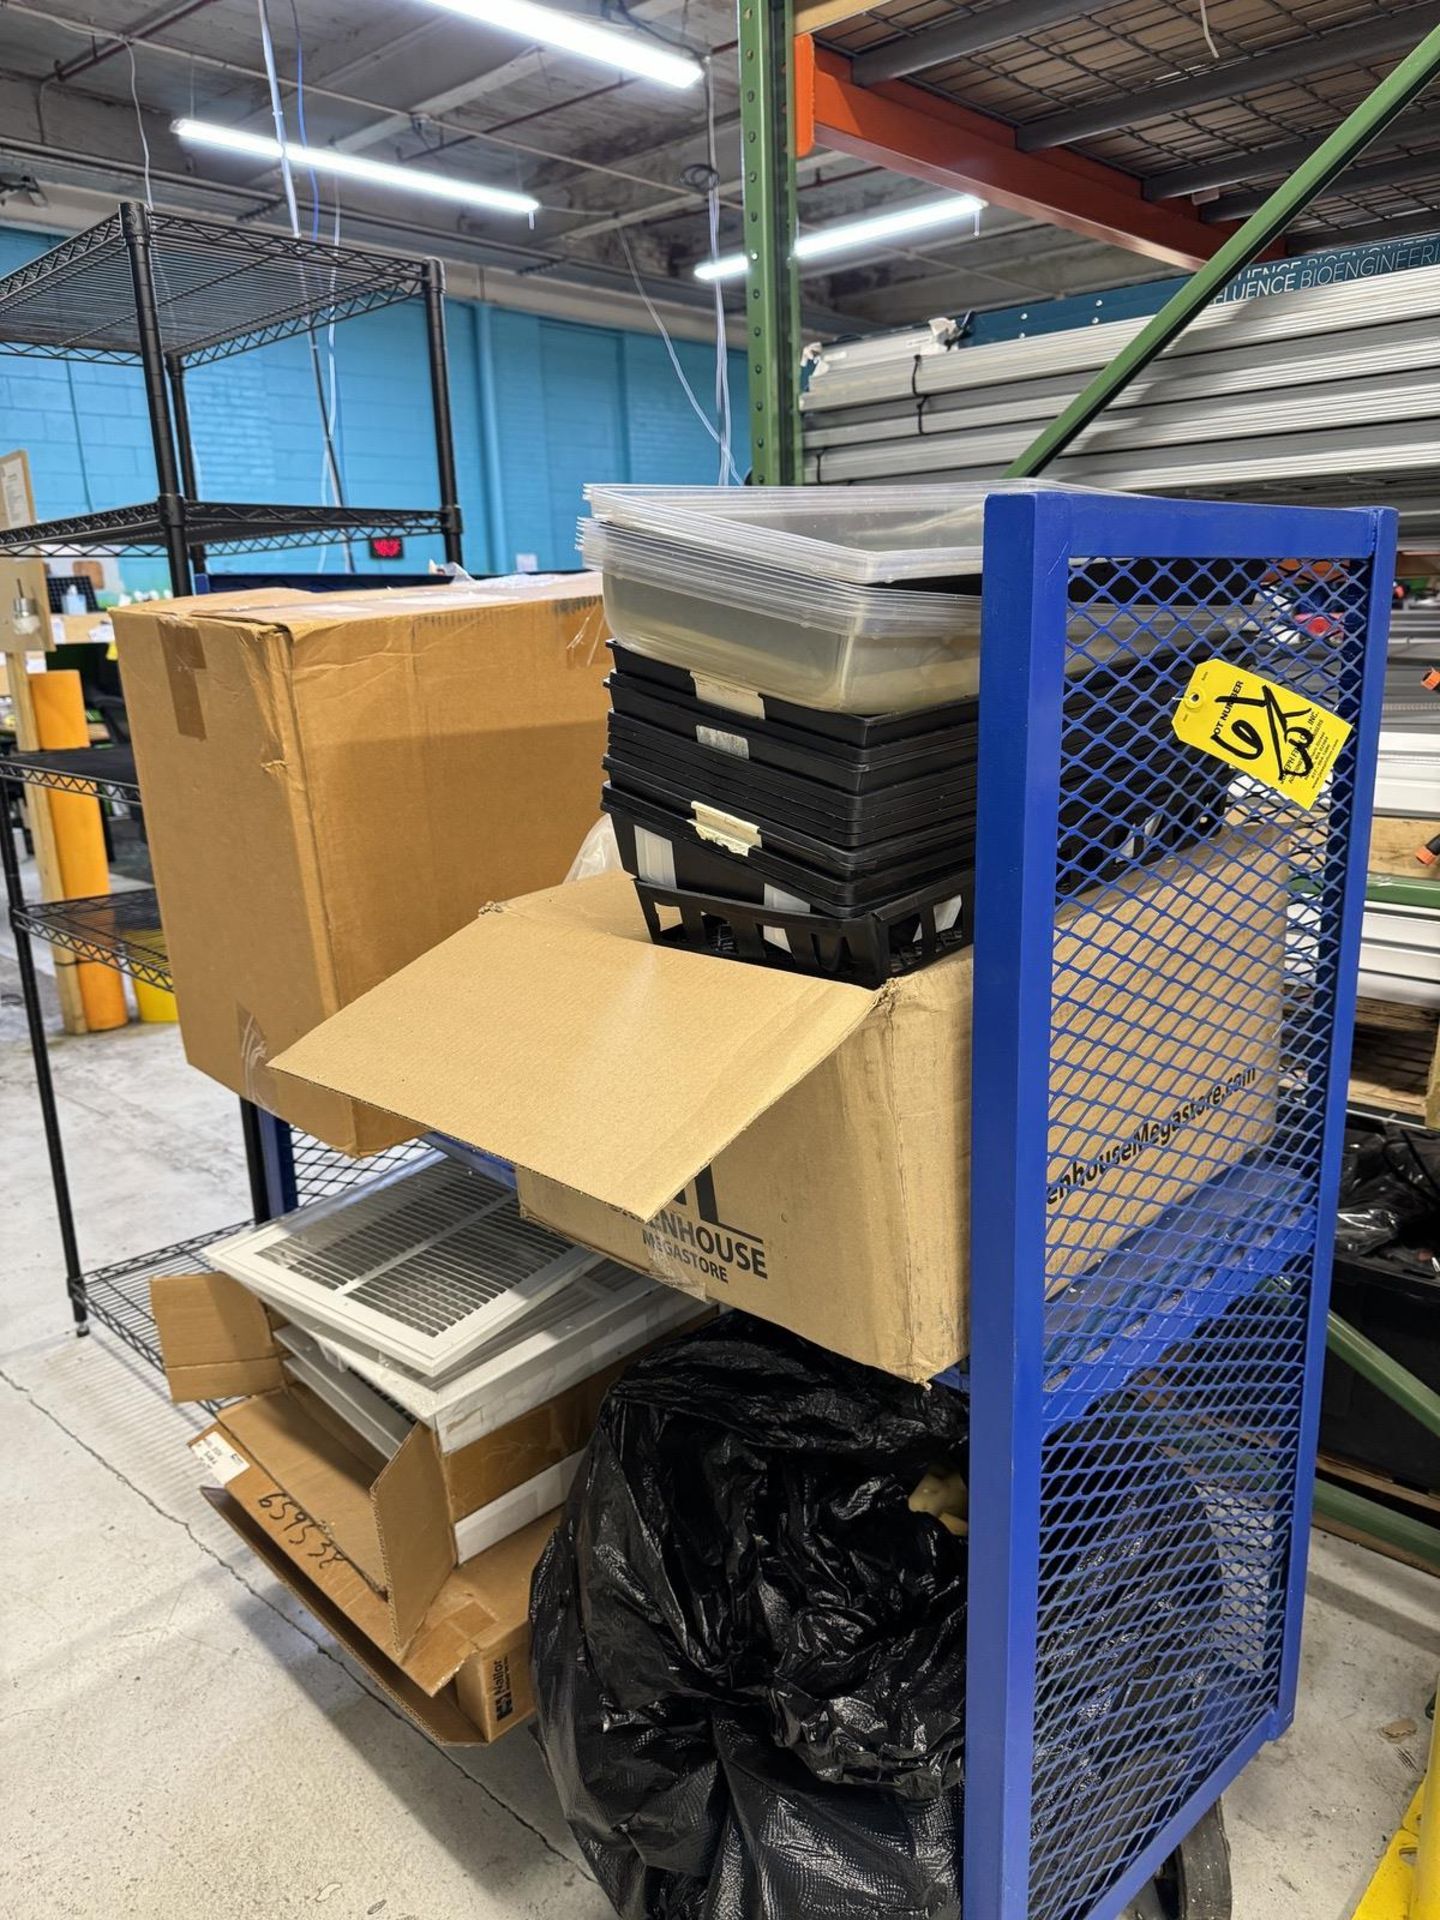 Lot Blue Port. 2 Shelf Cart with Vent Covers, Plastic Trays, Filters, Etc.